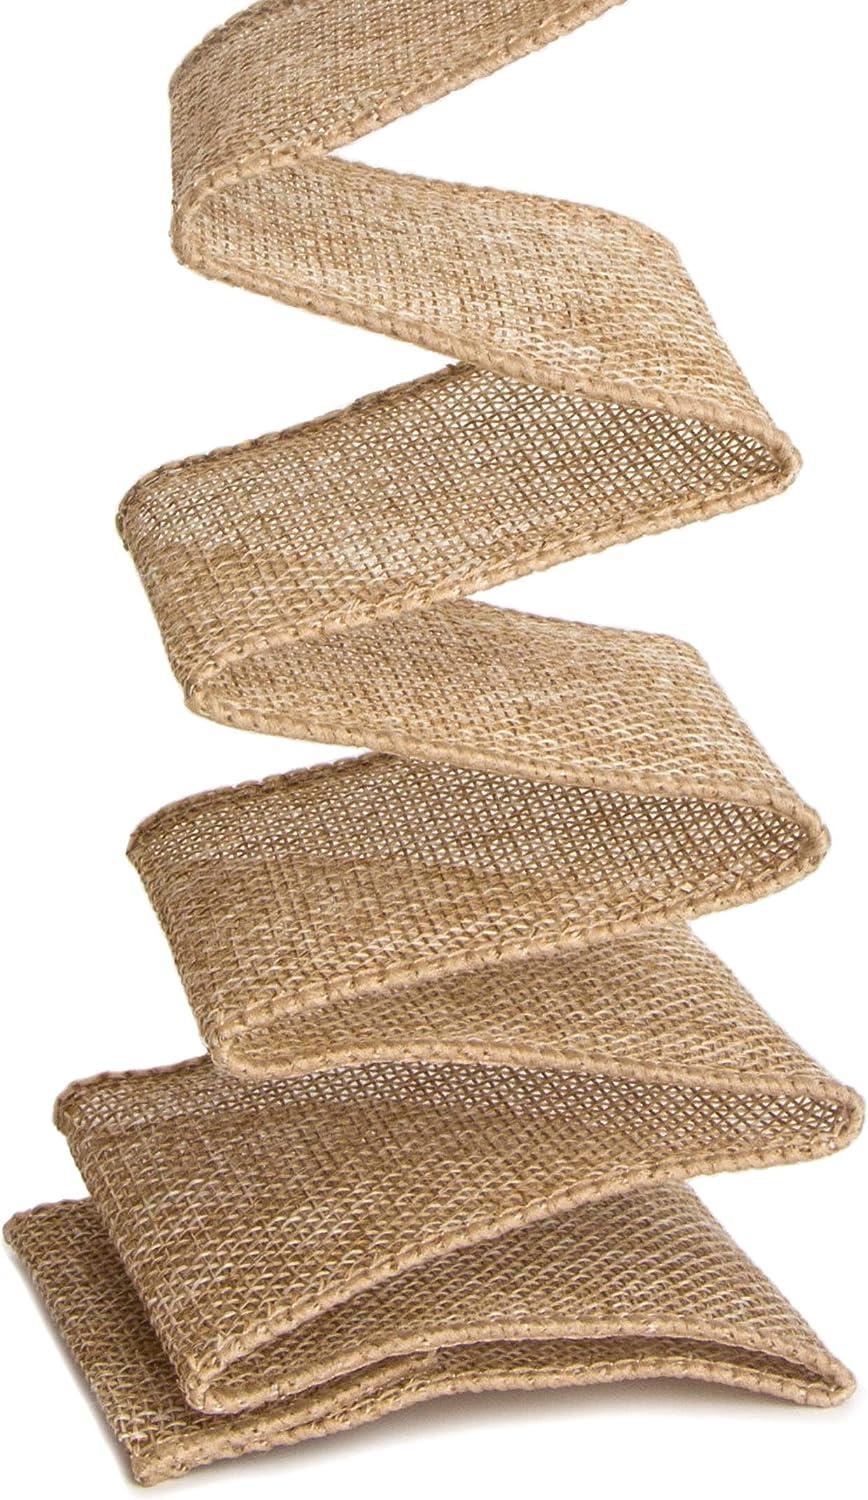 Ribbli Burlap Wired Edge Ribbon,1-1/2 Inch x 10 Yard,Natural,Solid for Big  Bow,Wreath,Tree, Outdoor Decoration